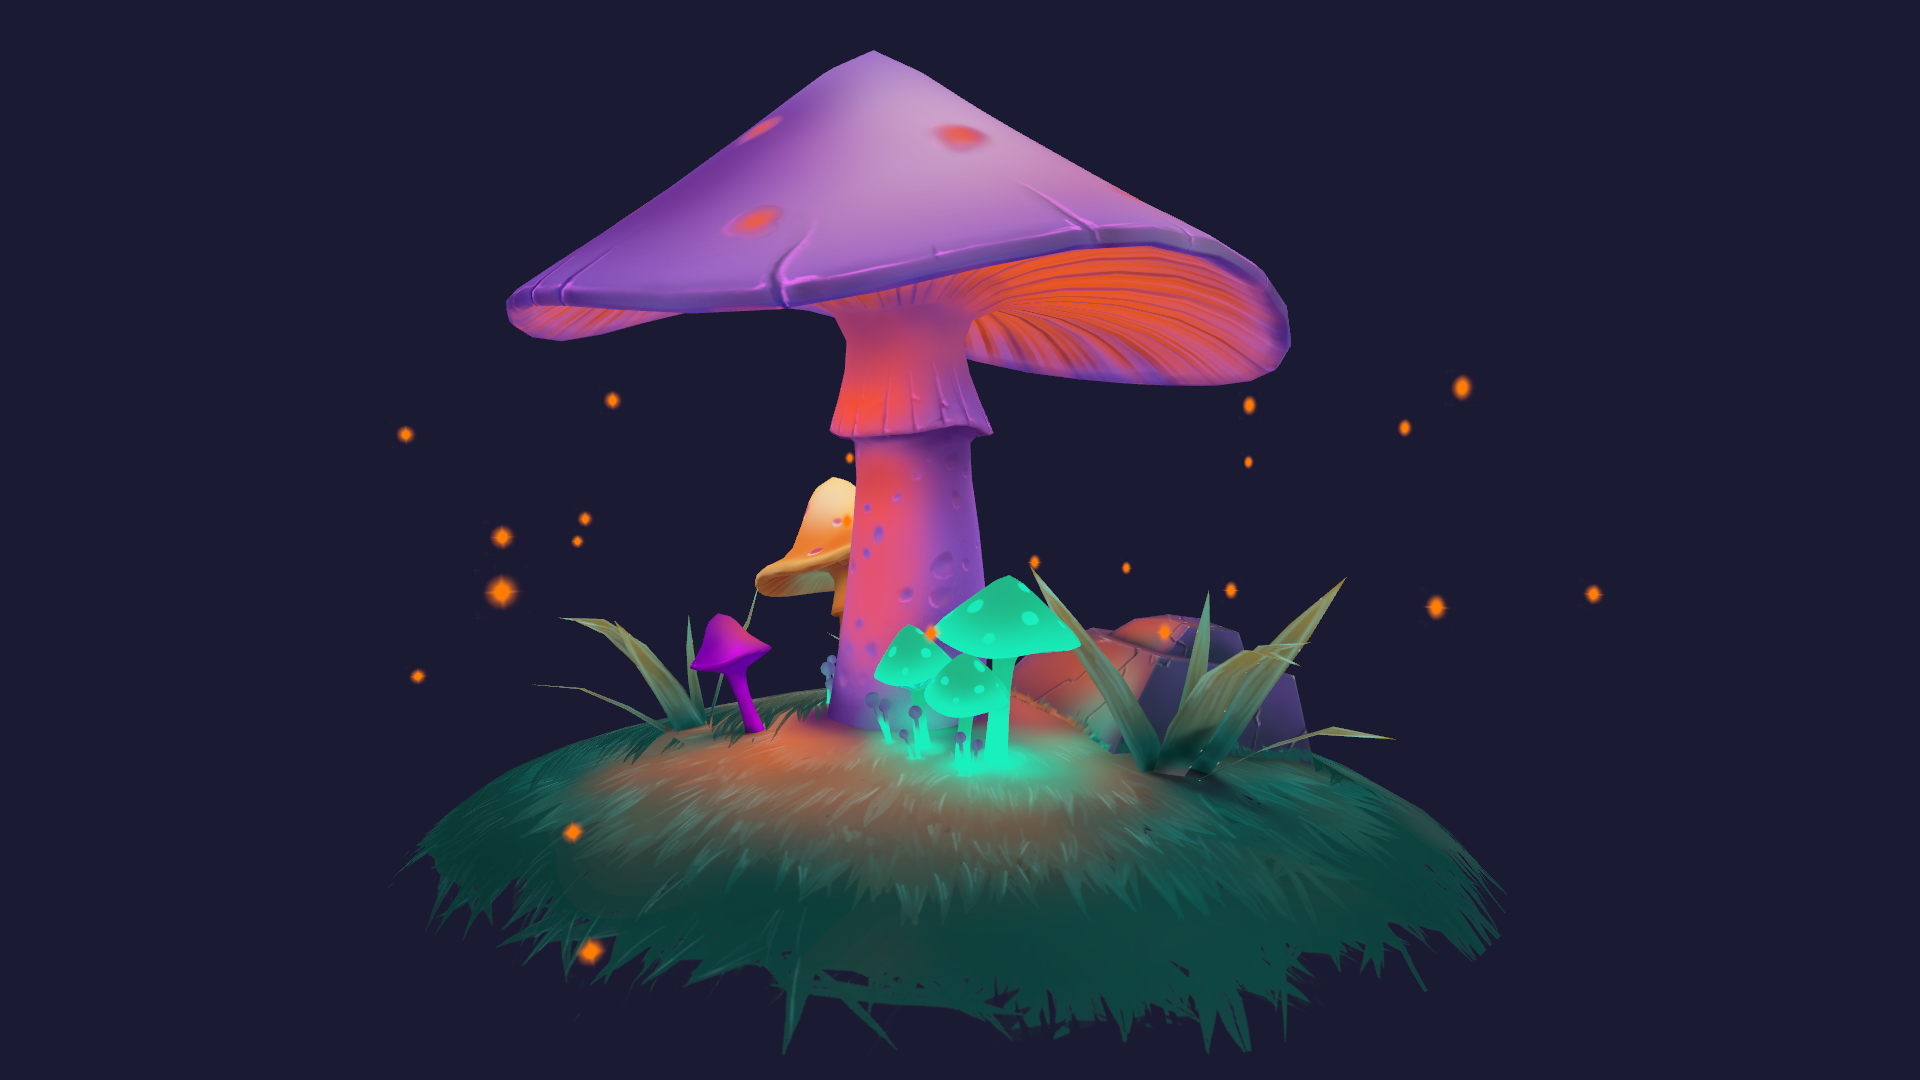 'Stylized mushrooms' scene by QumoDone rendered in Bevy. This scene is licensed under Creative Commons Attribution.